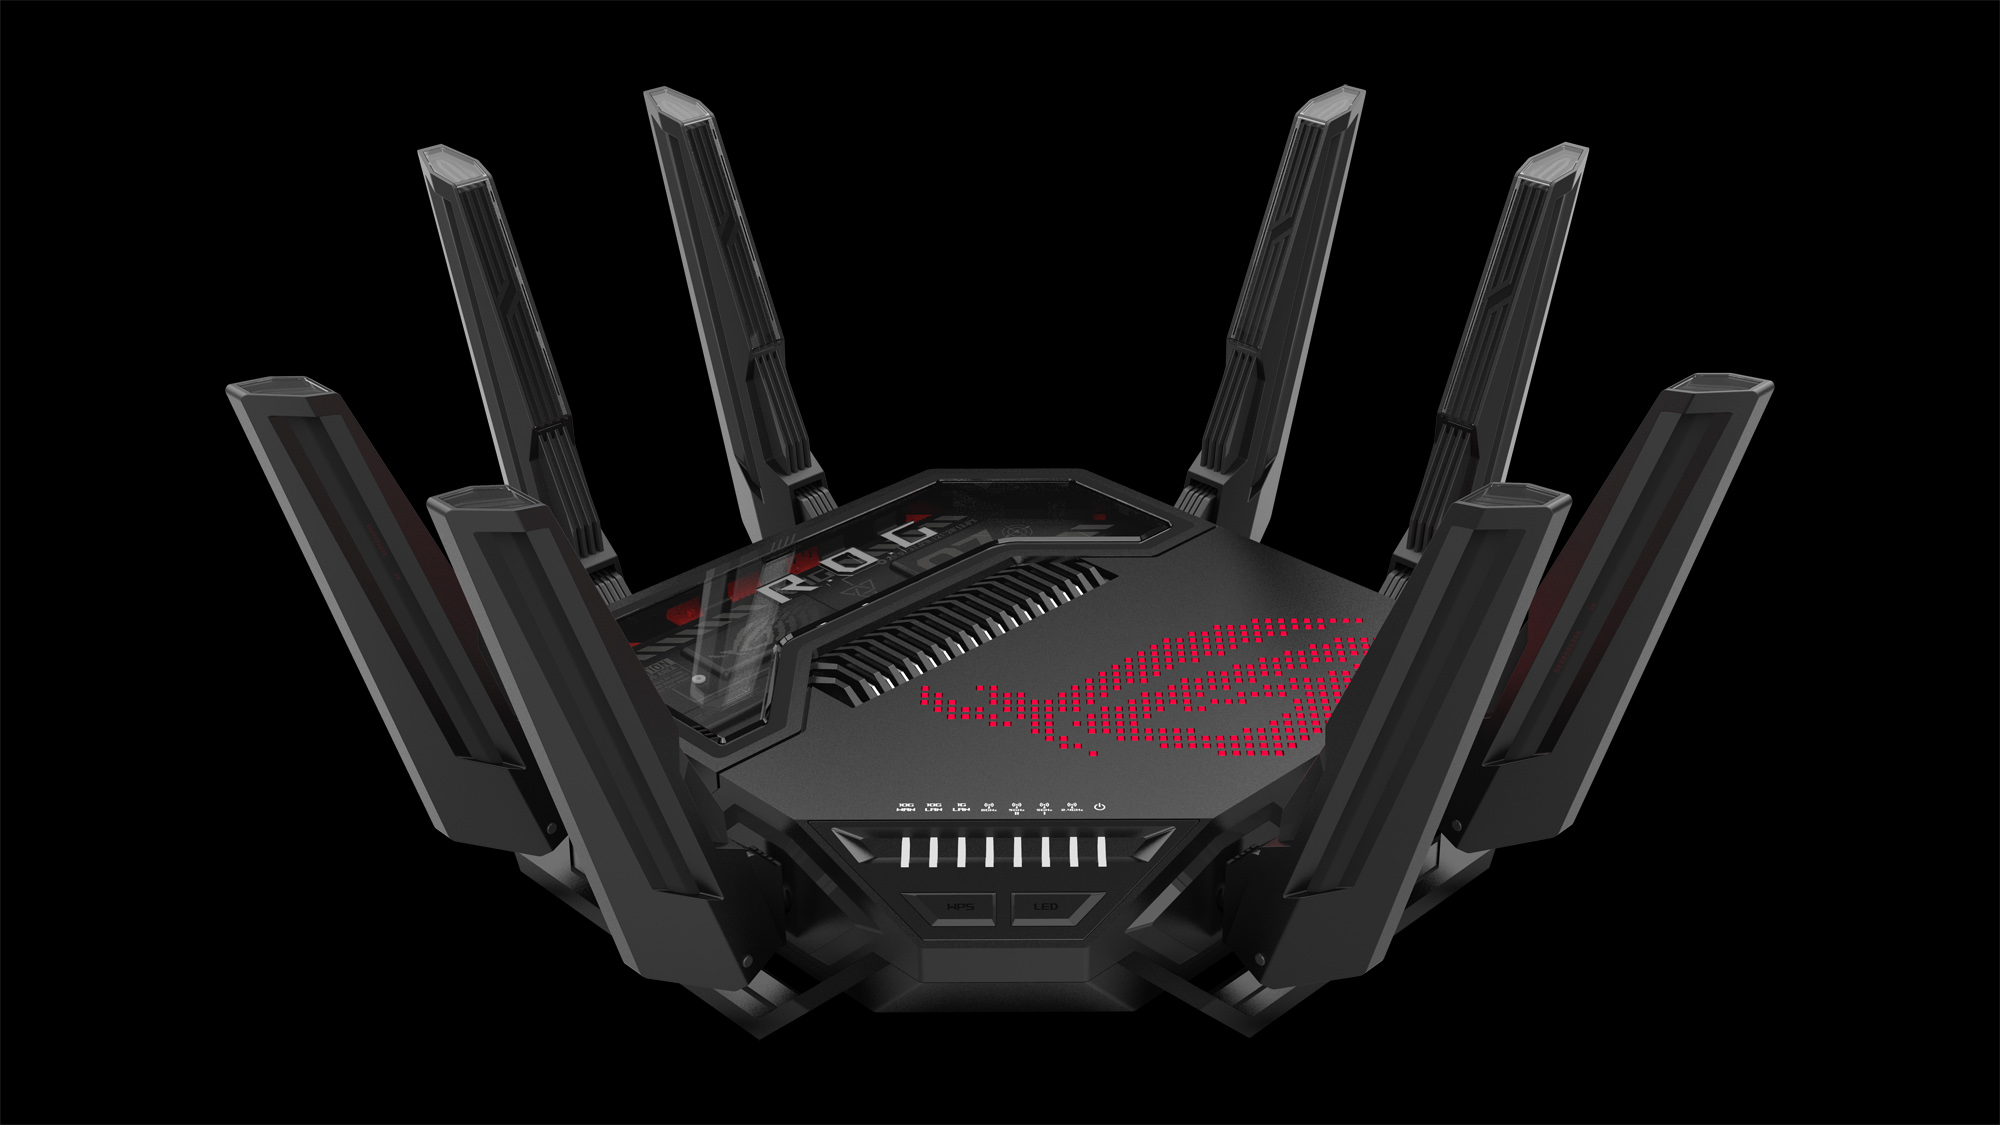 What is WiFi 7? How Does WiFi 7 Work?, WiFi 7 Routers